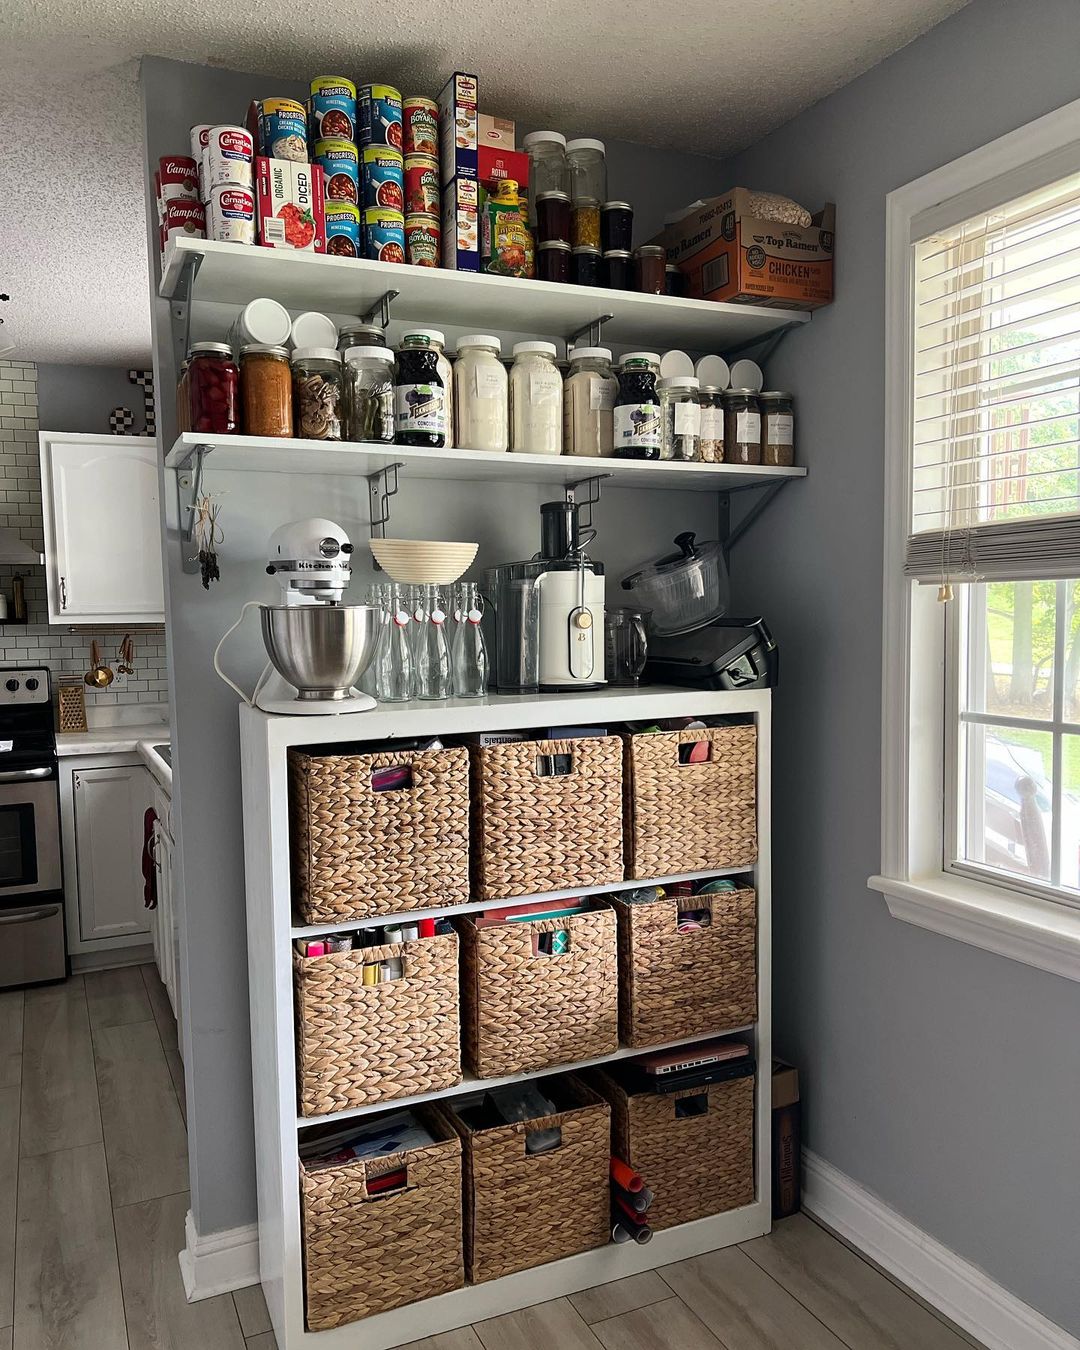 Utilitarian Pantry with Woven Baskets